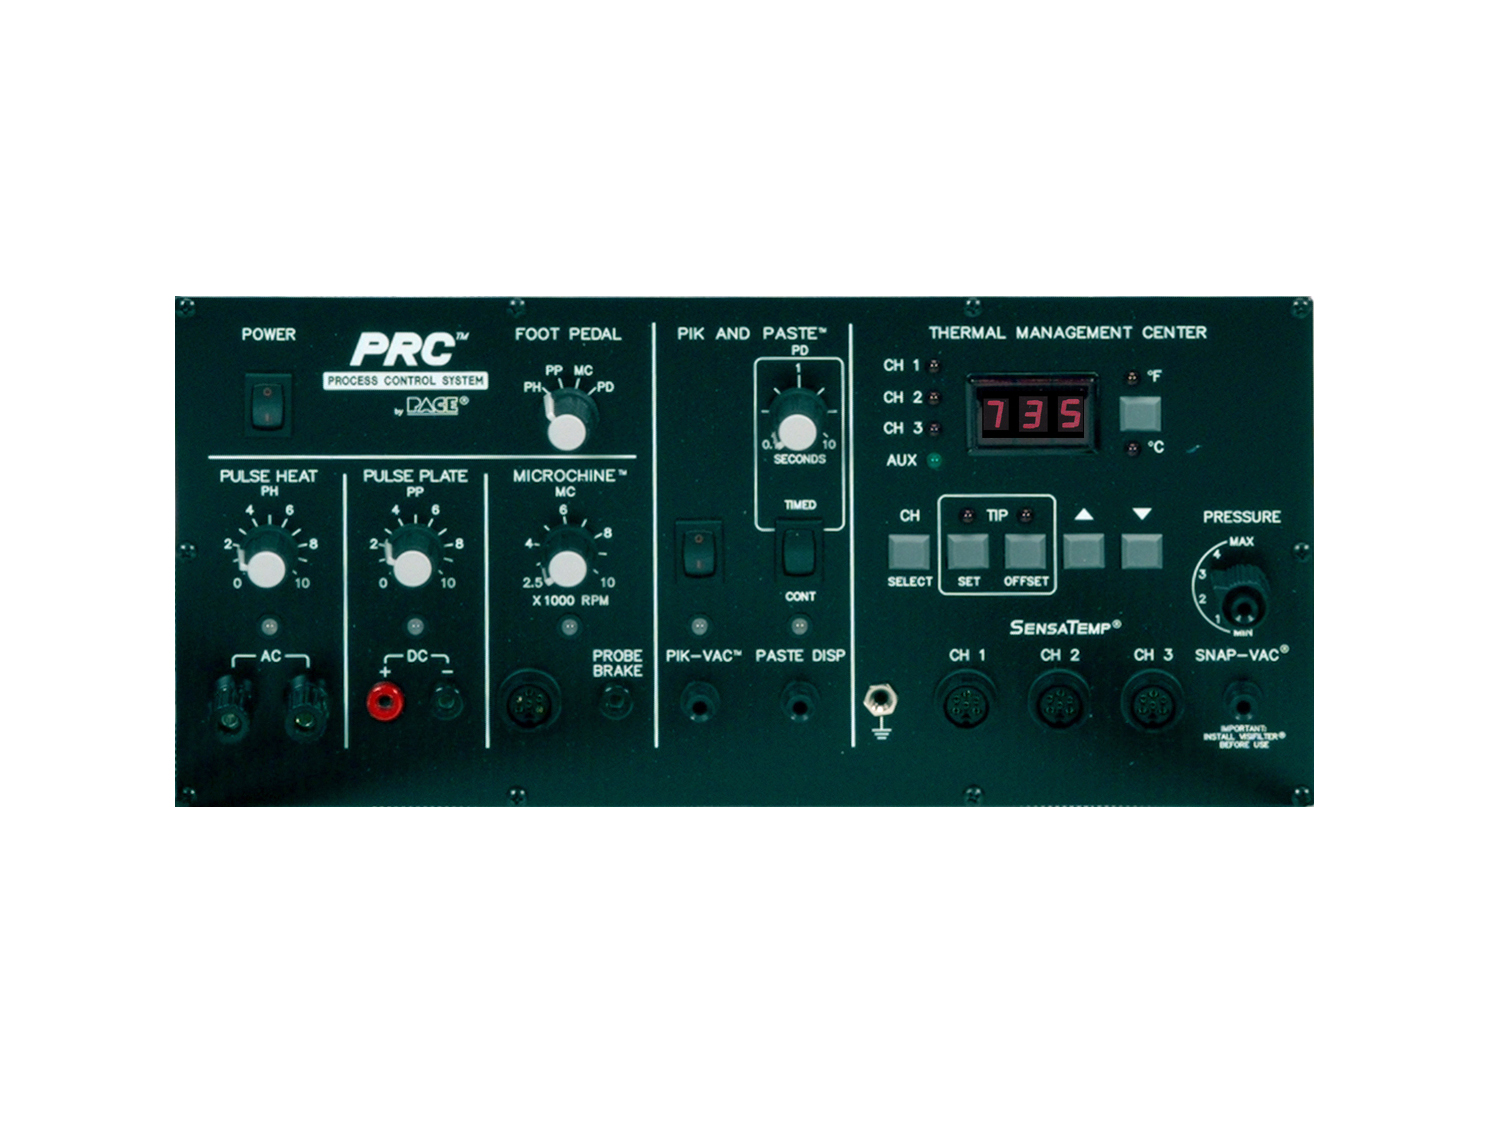 PPS-400 (PRC 2000 Power Supply)